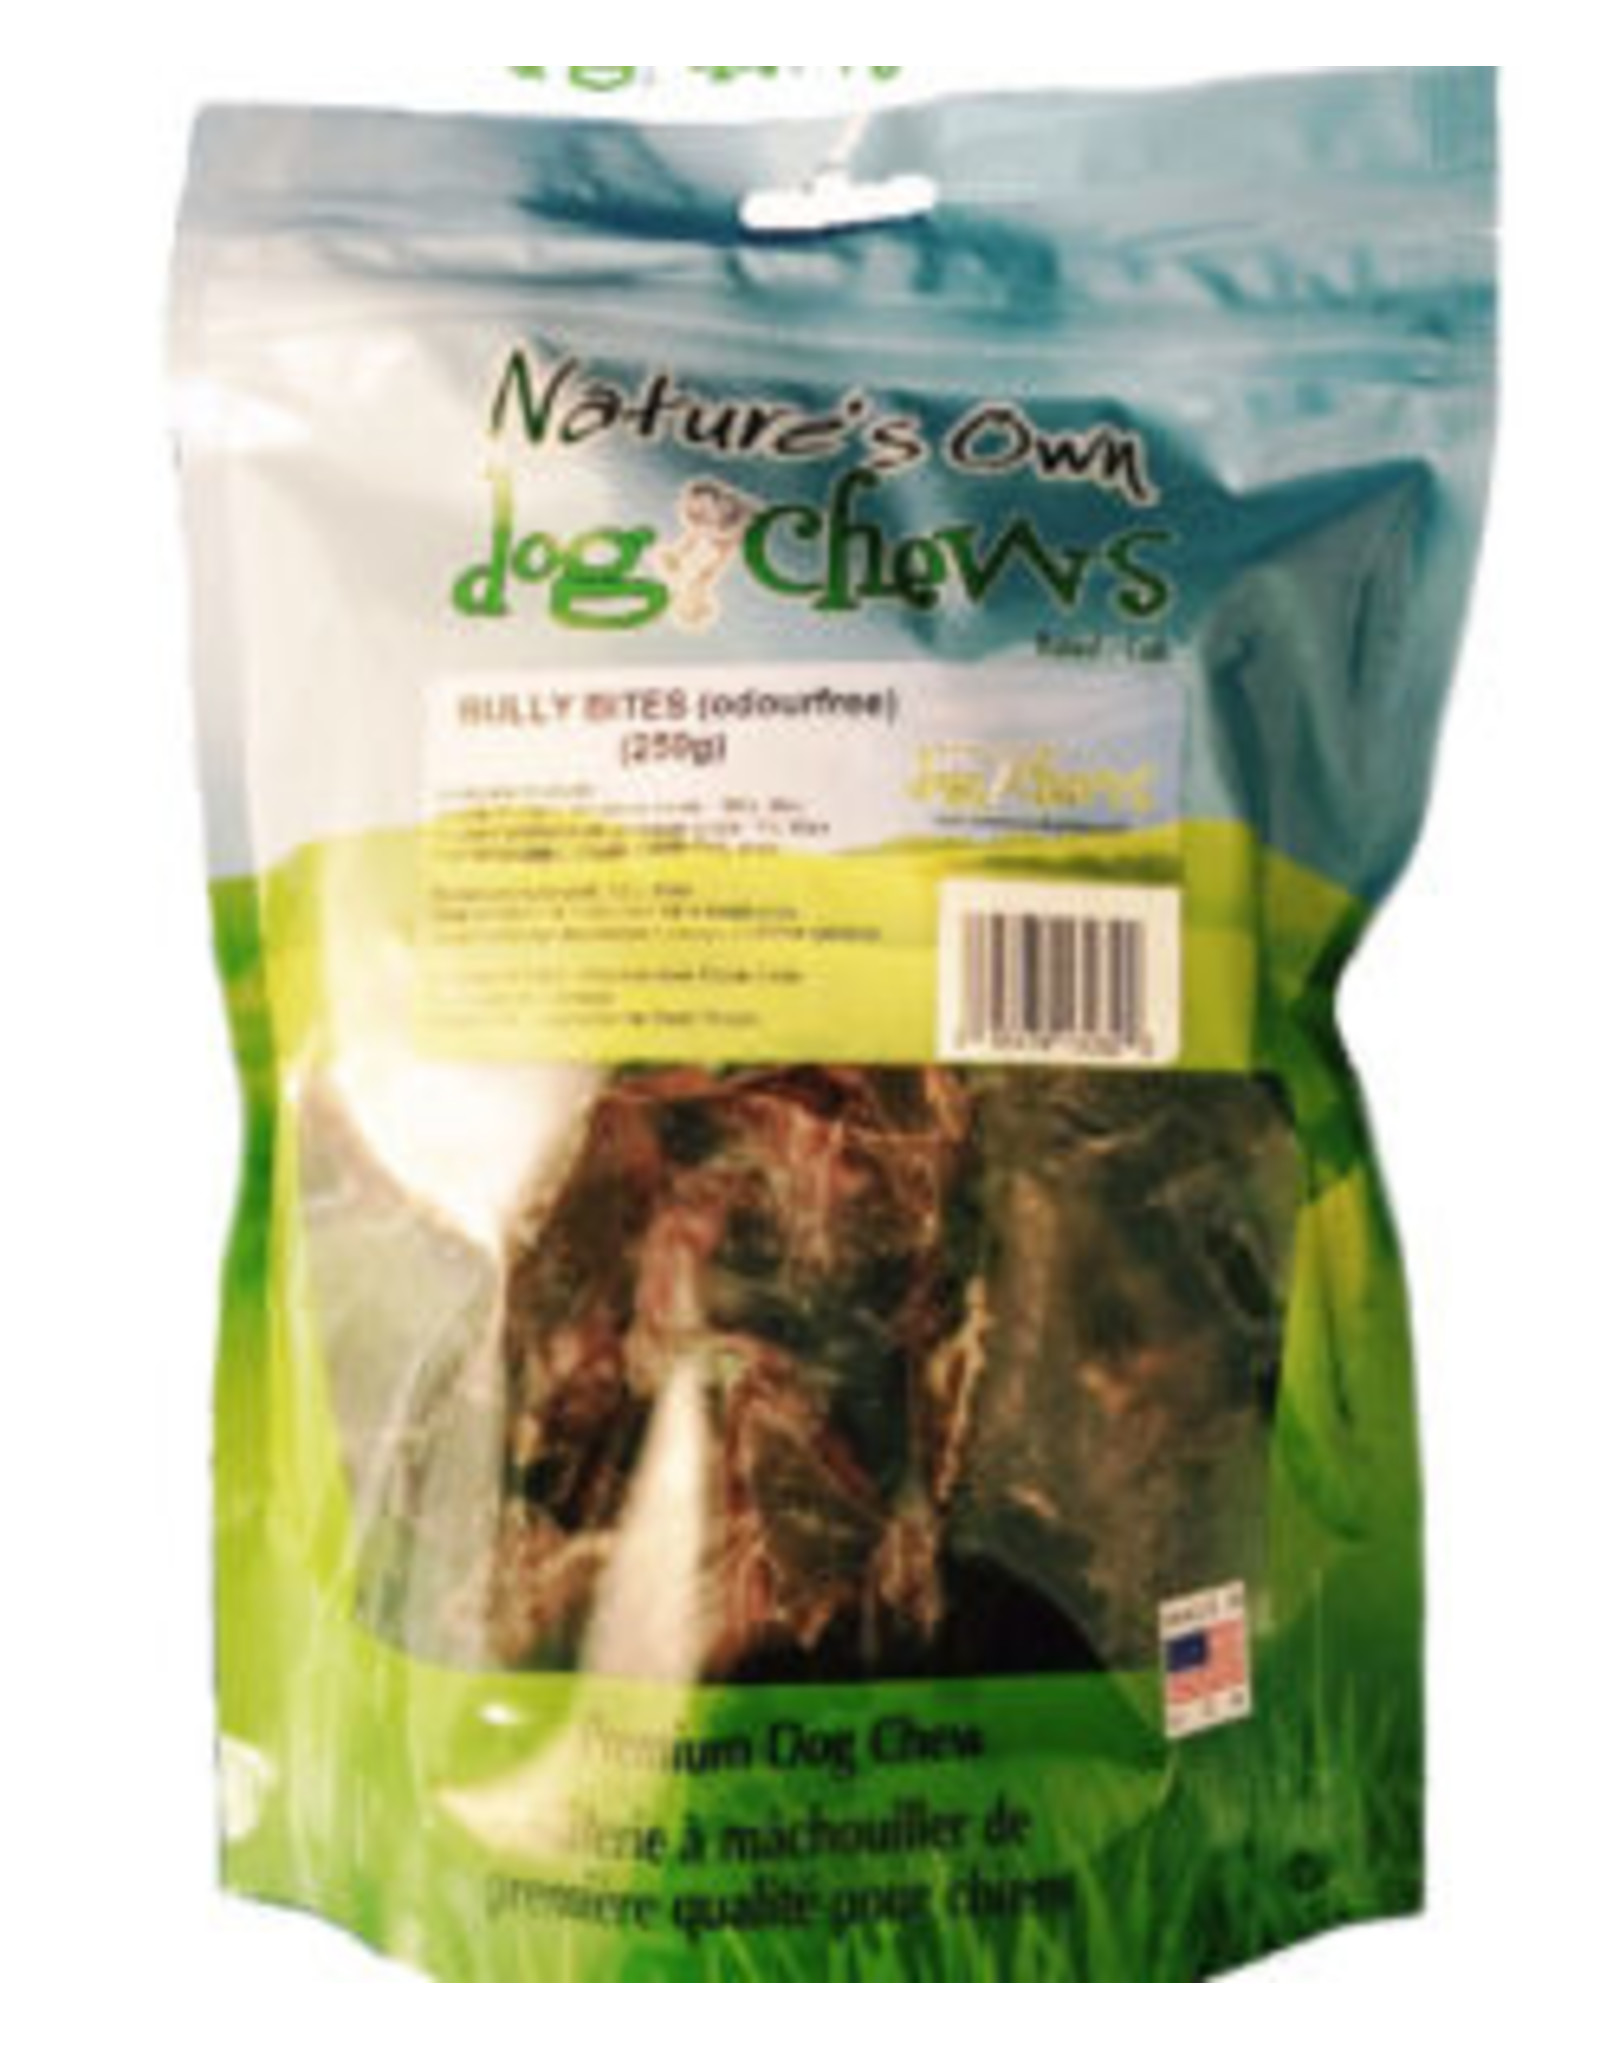 natures own dog chews Nature's Own Bully bites 250g